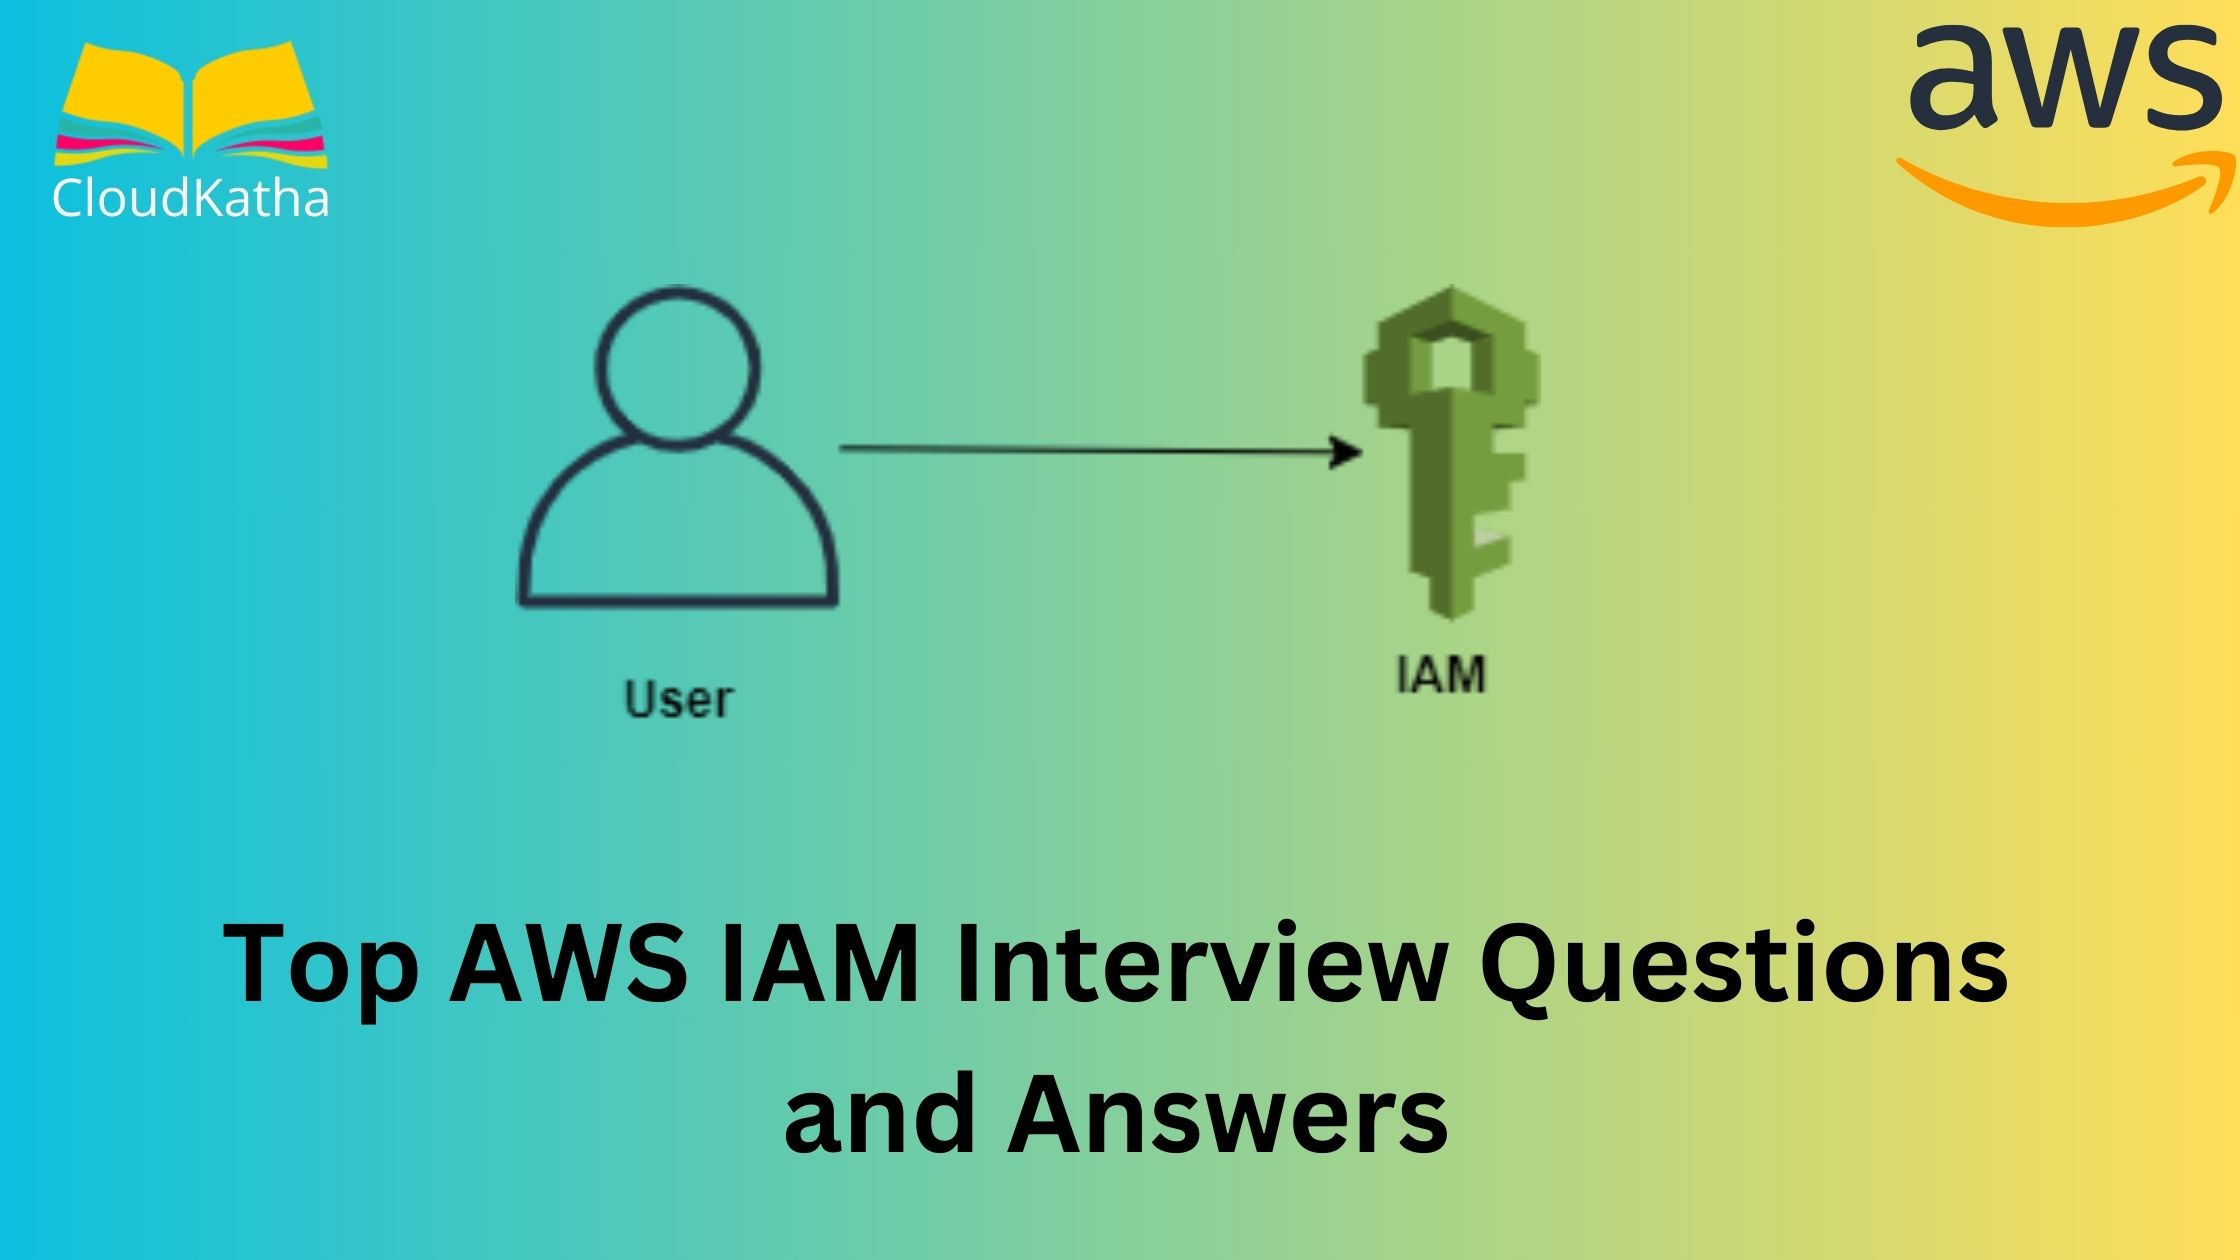 AWS IAM interview questions